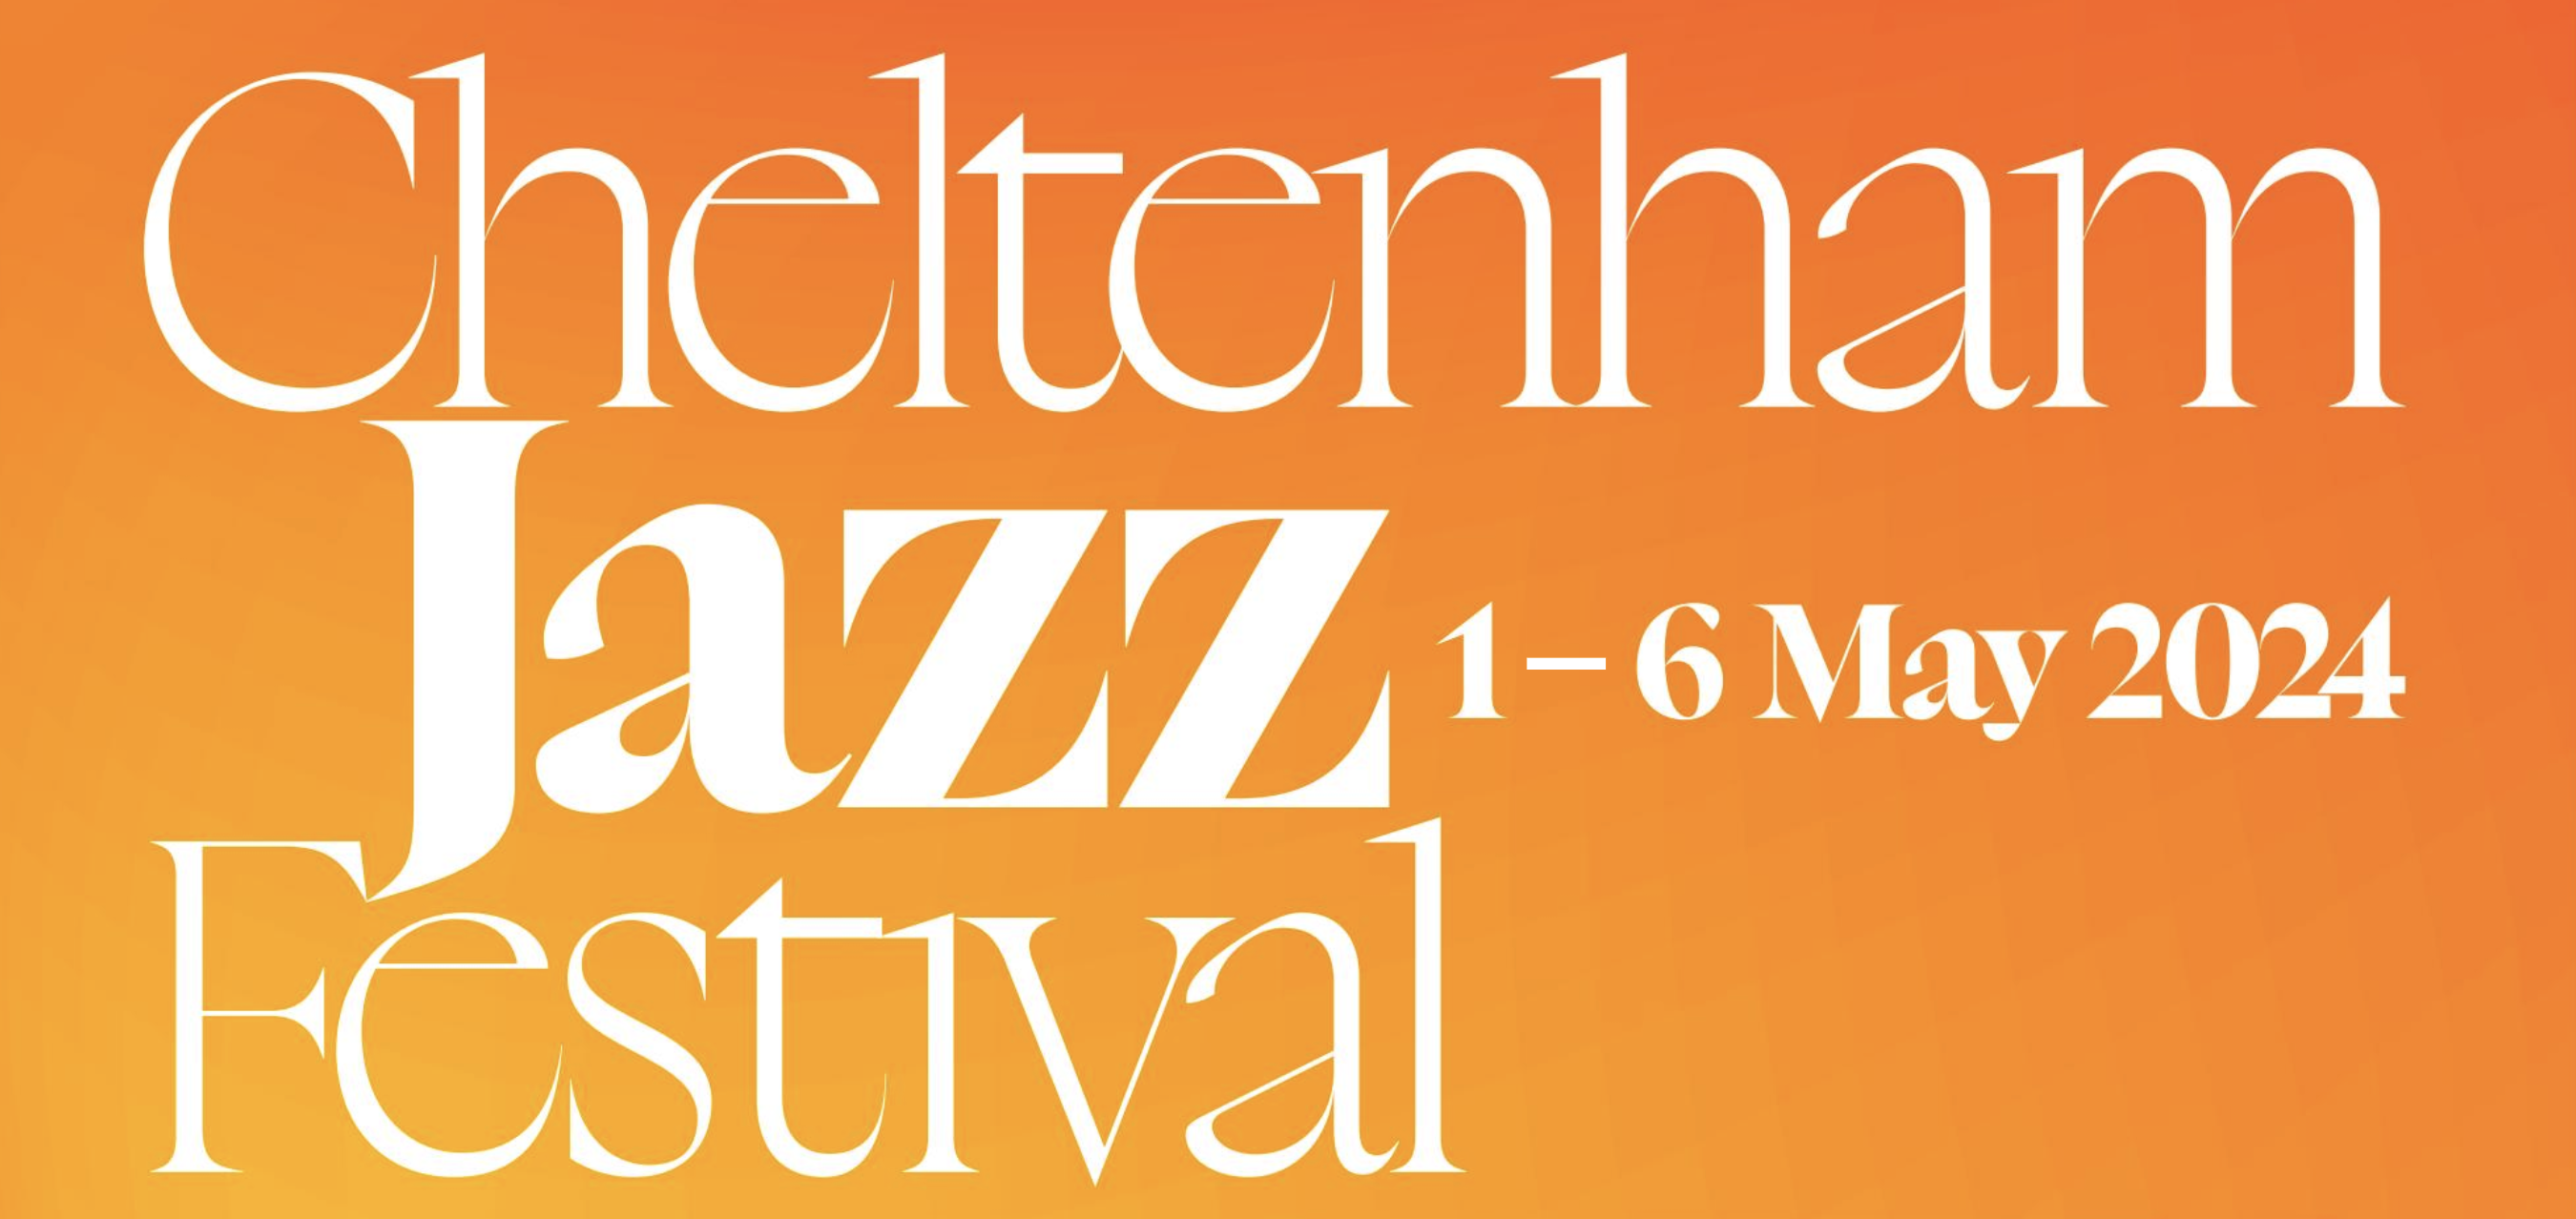 Banner image for the 2024 Cheltenham Jazz Festival, showing dates in white text on an orange background